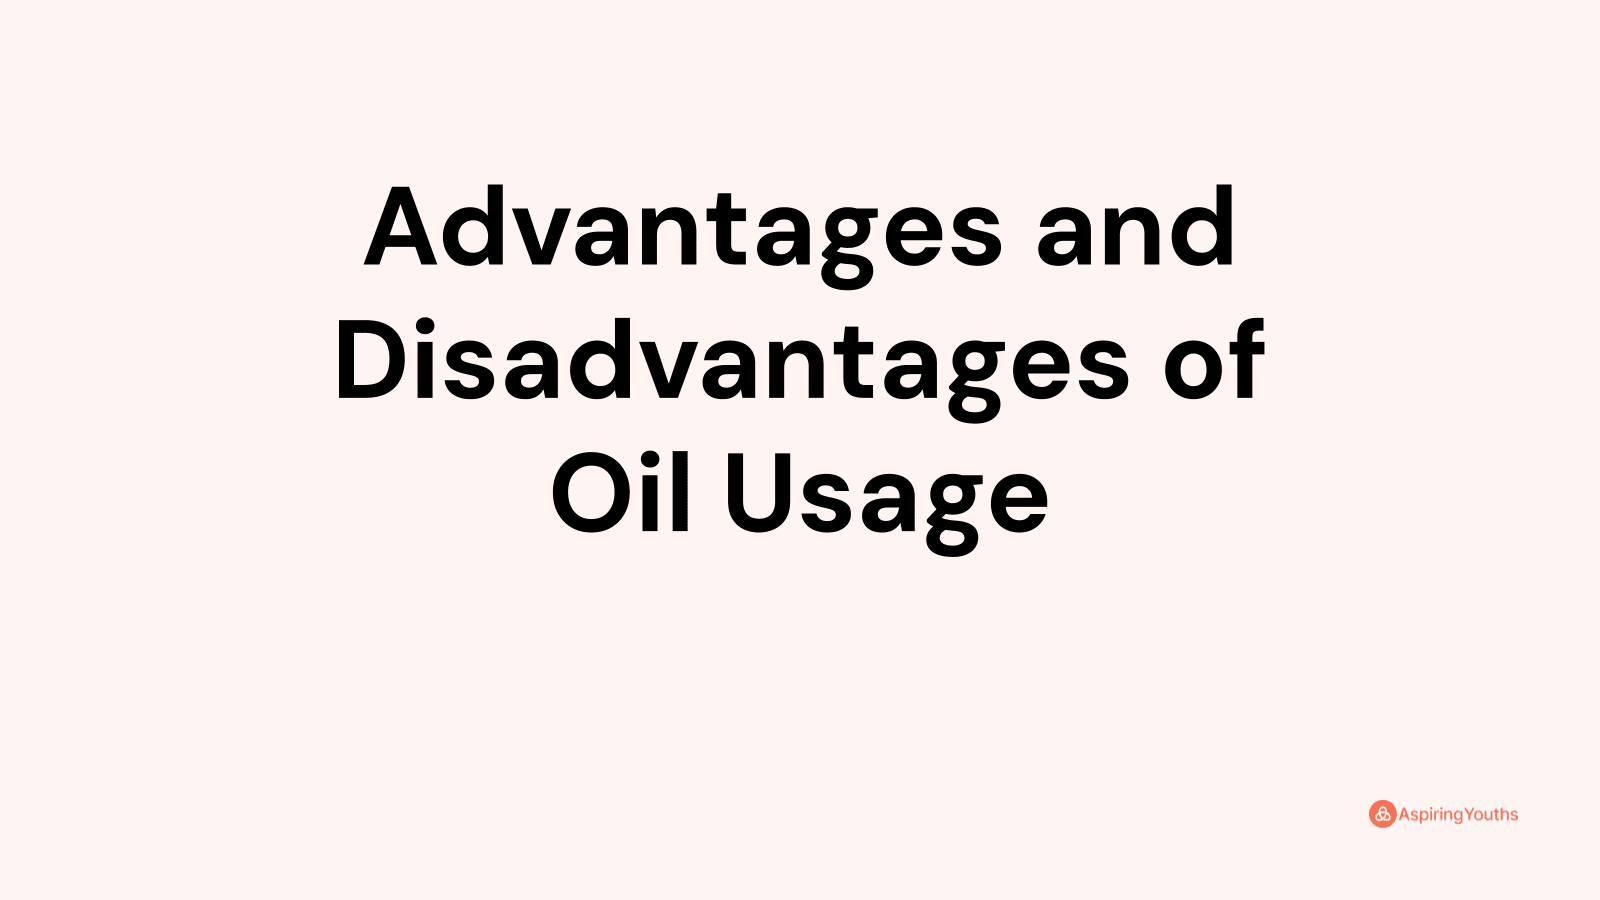 Advantages and disadvantages of Oil Usage